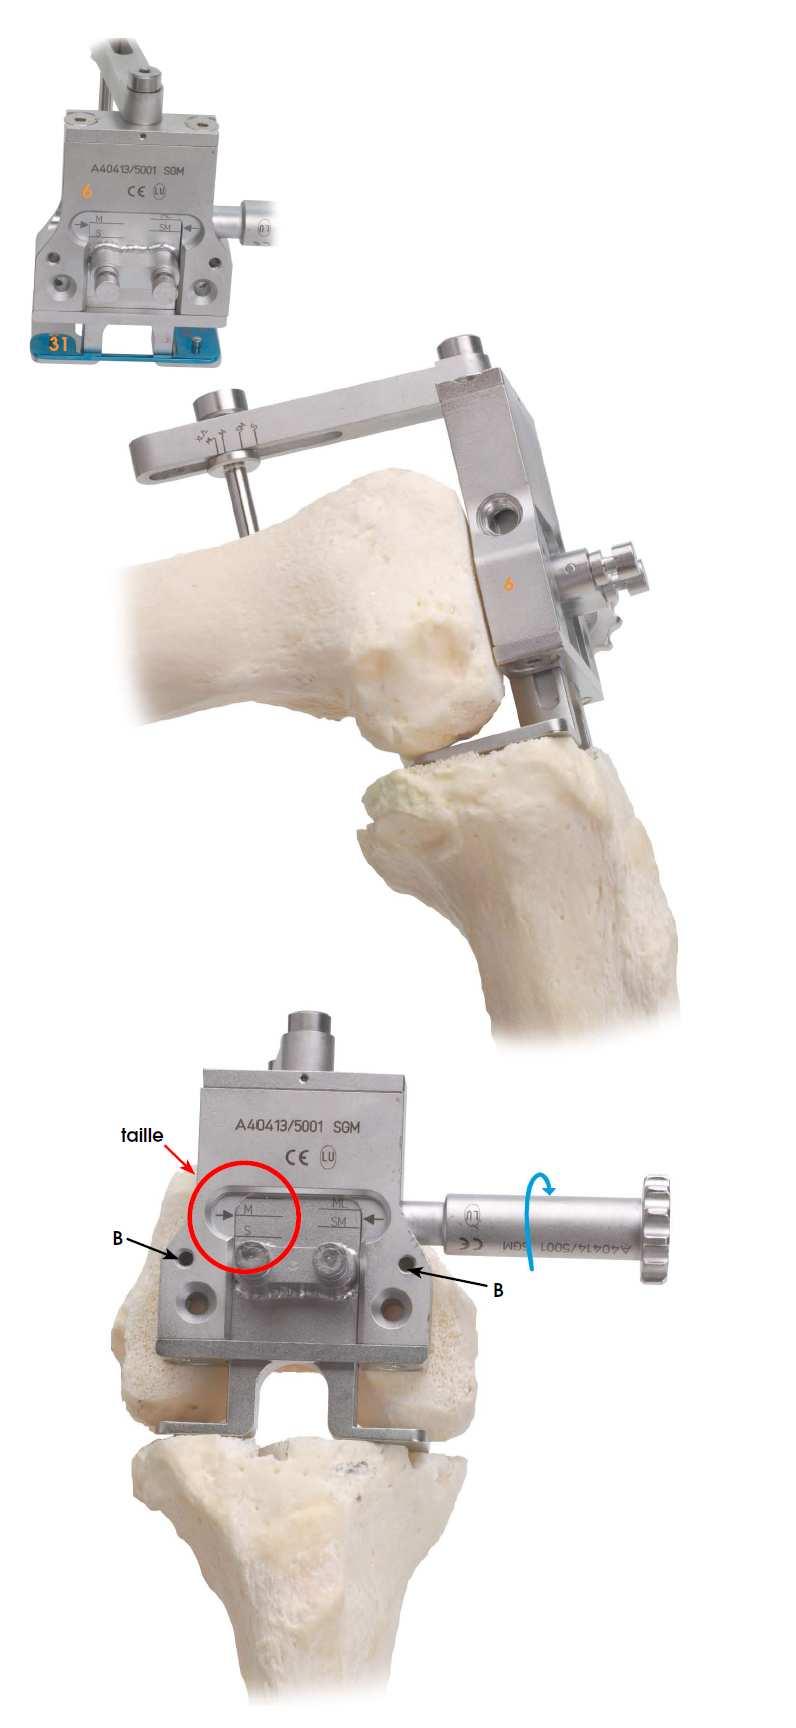 CHECKING Place the knee in extension. Check the stability in extension using the spacer (14) corresponding to the tibial resection: 9, 11, 13 or 16mm. FEMORAL ROTATION Place the knee at 90 flexion.